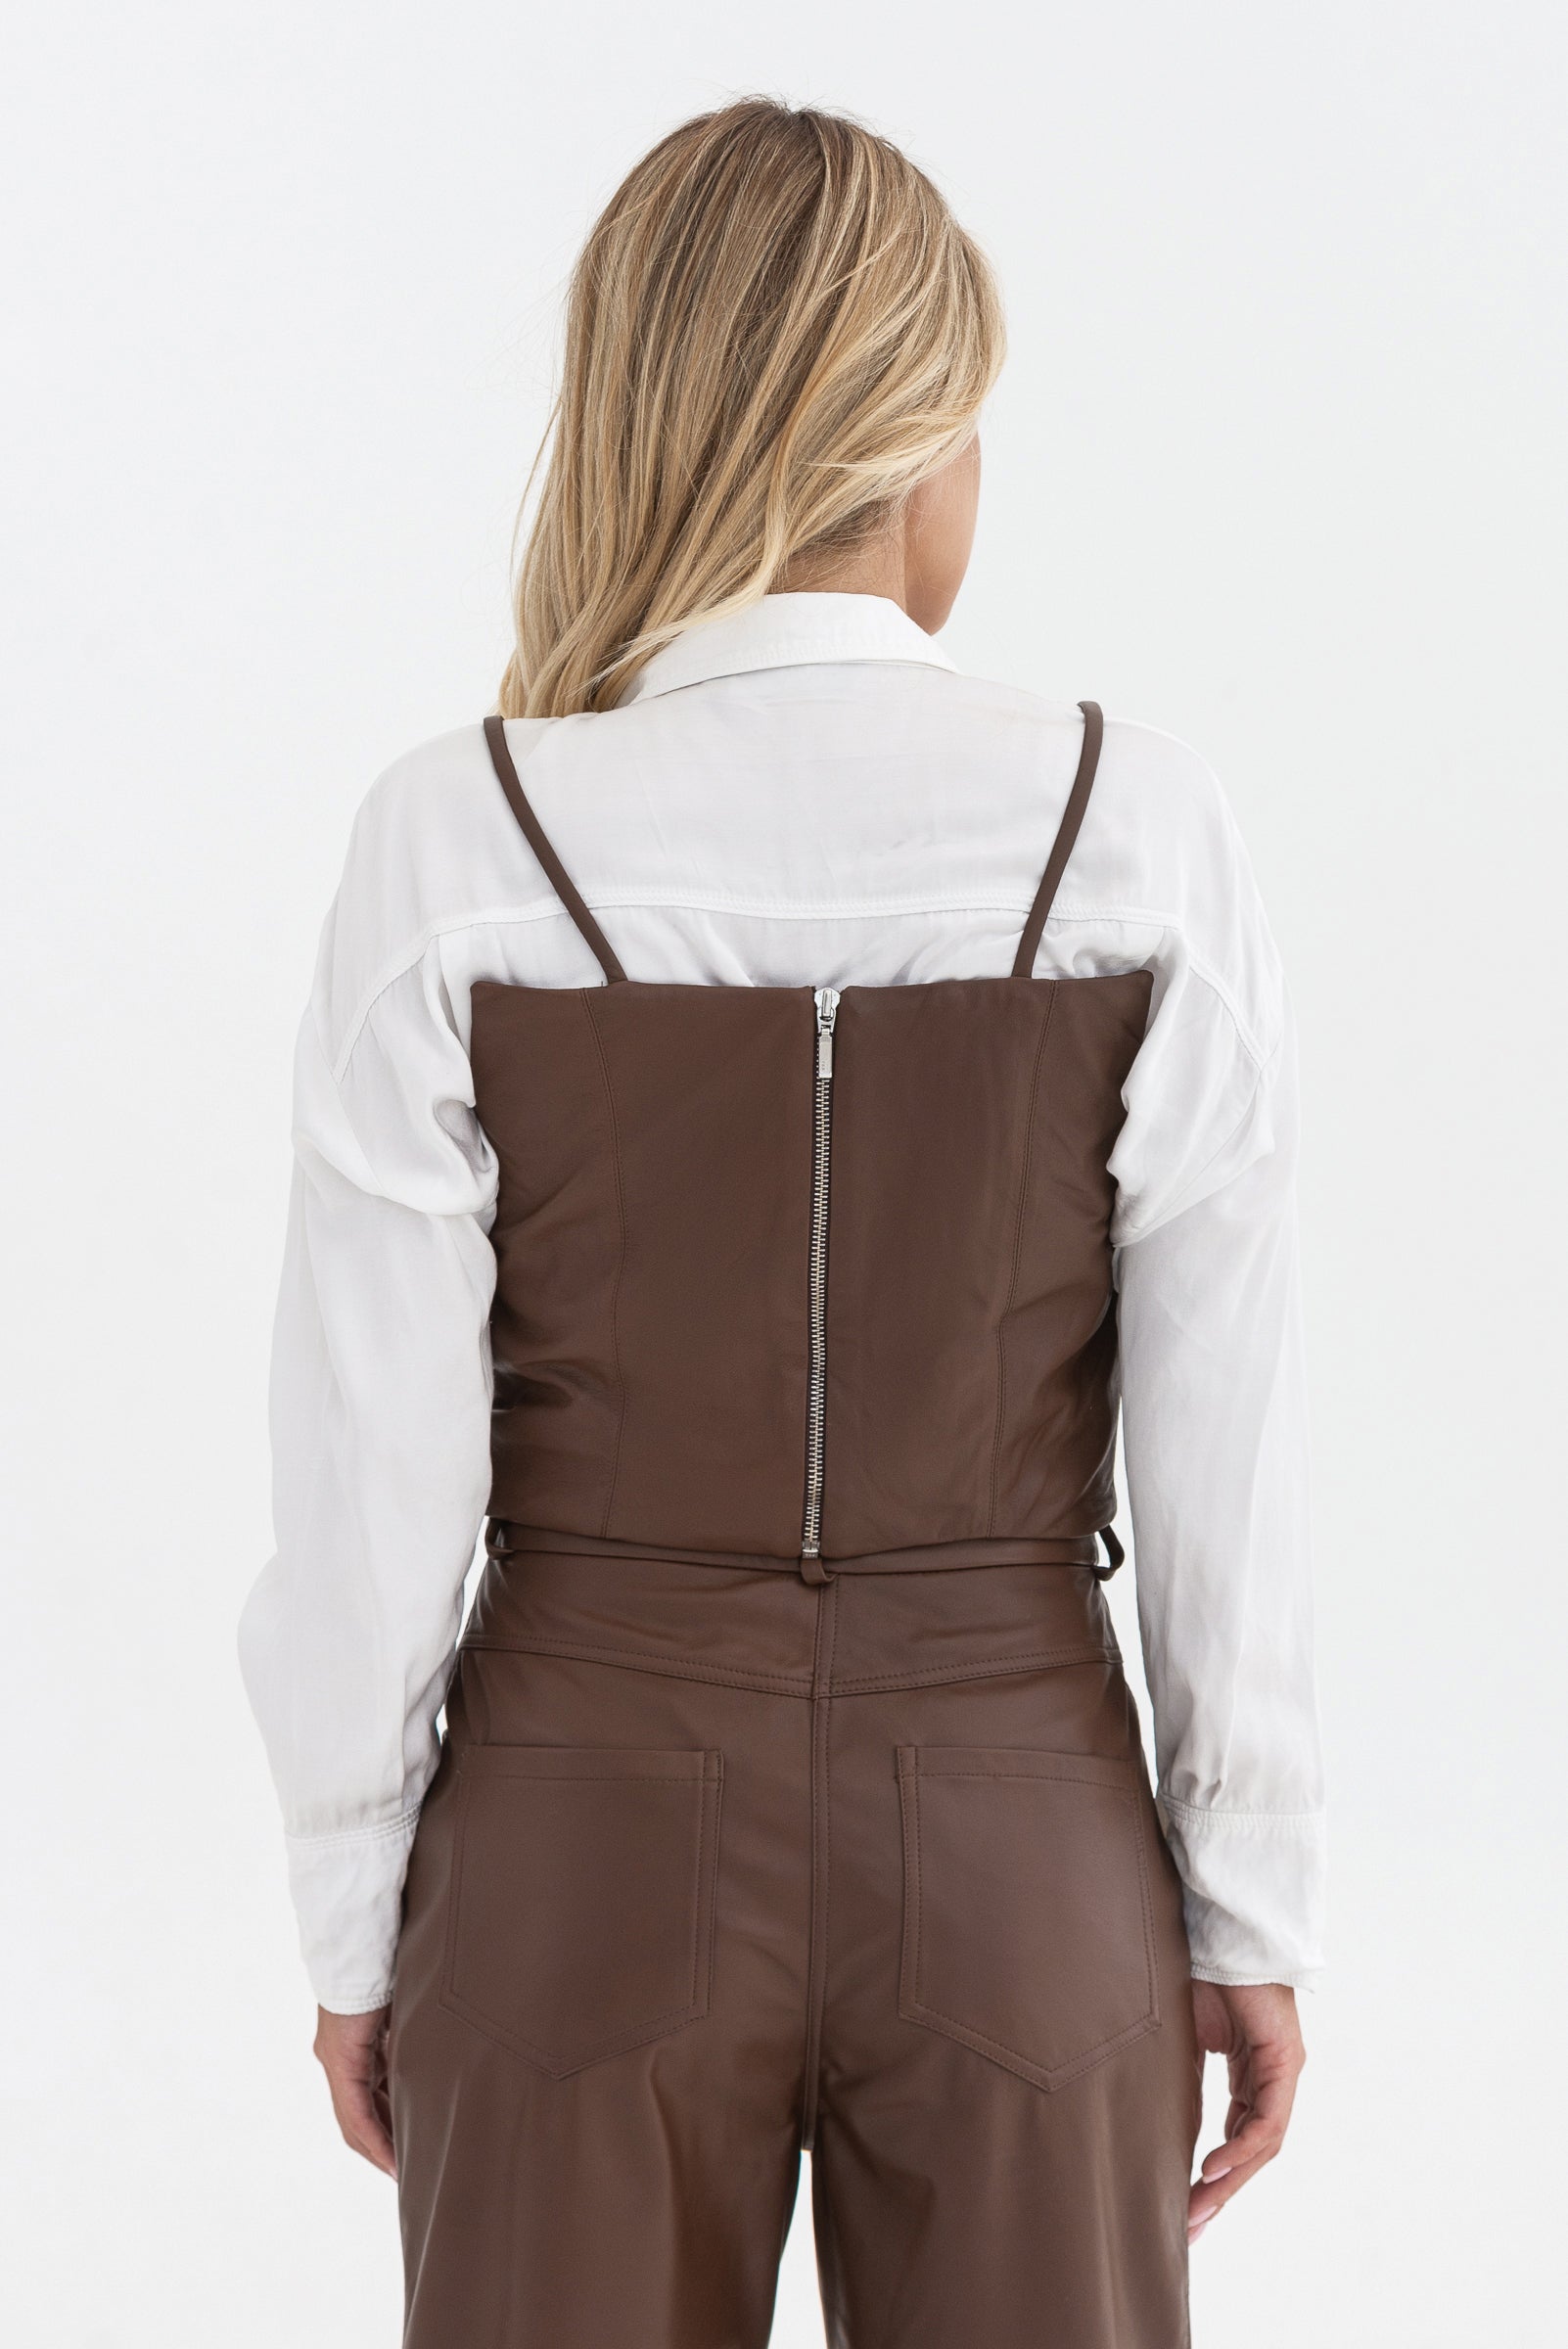 Spaghetti strap top with decorative buttons. Leather